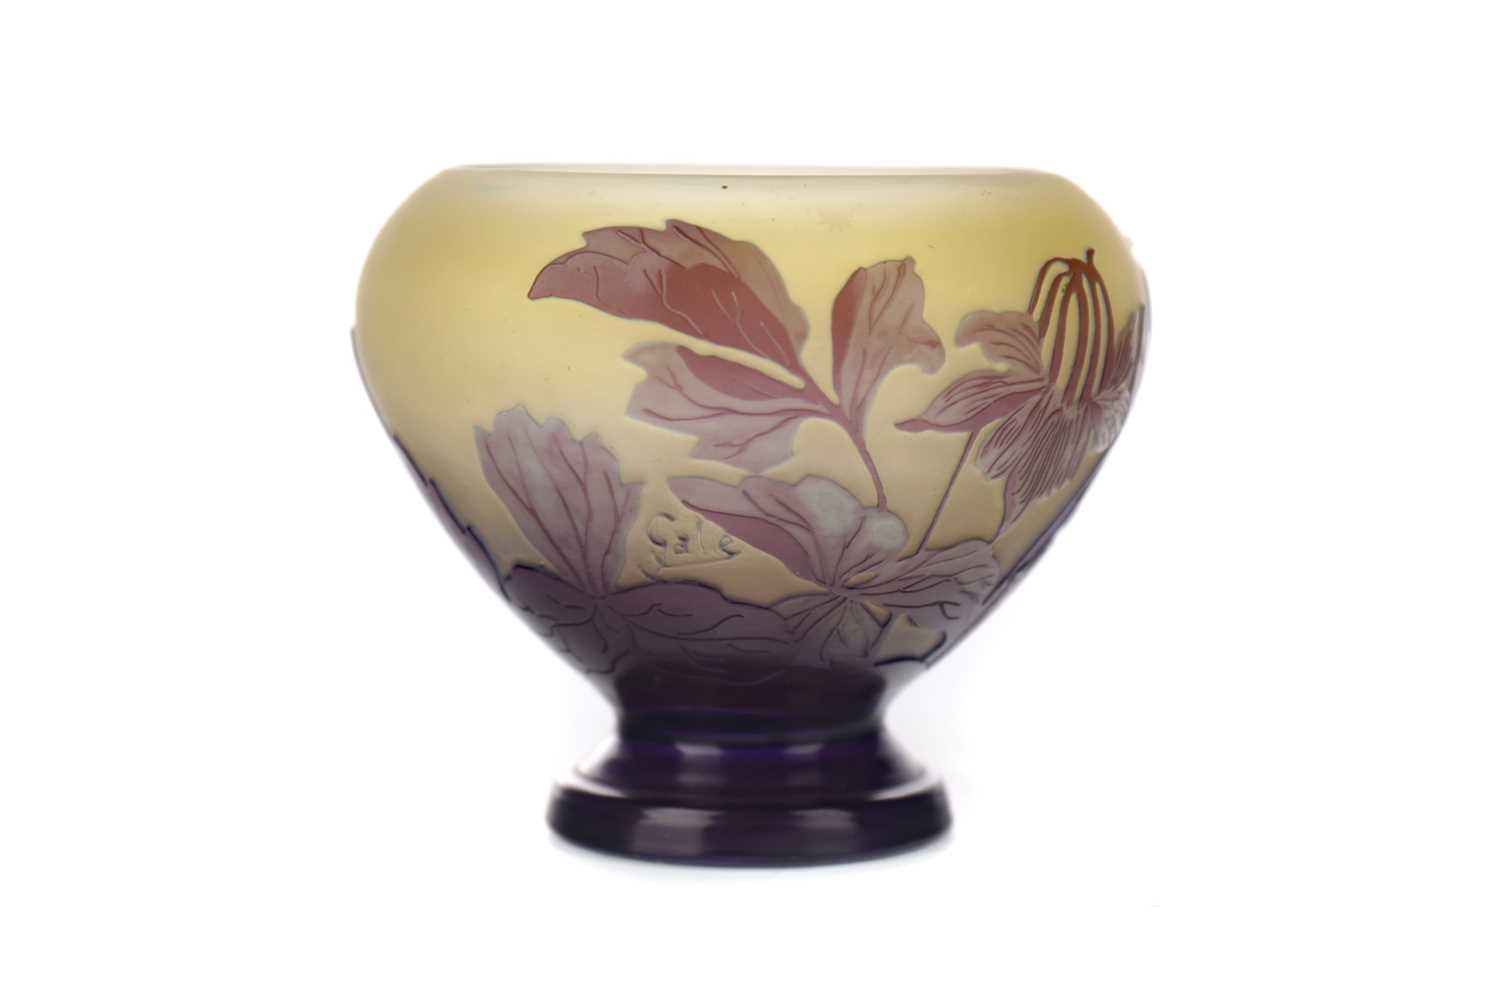 Lot 1088 - A GALLE CAMEO GLASS COUPE VASE